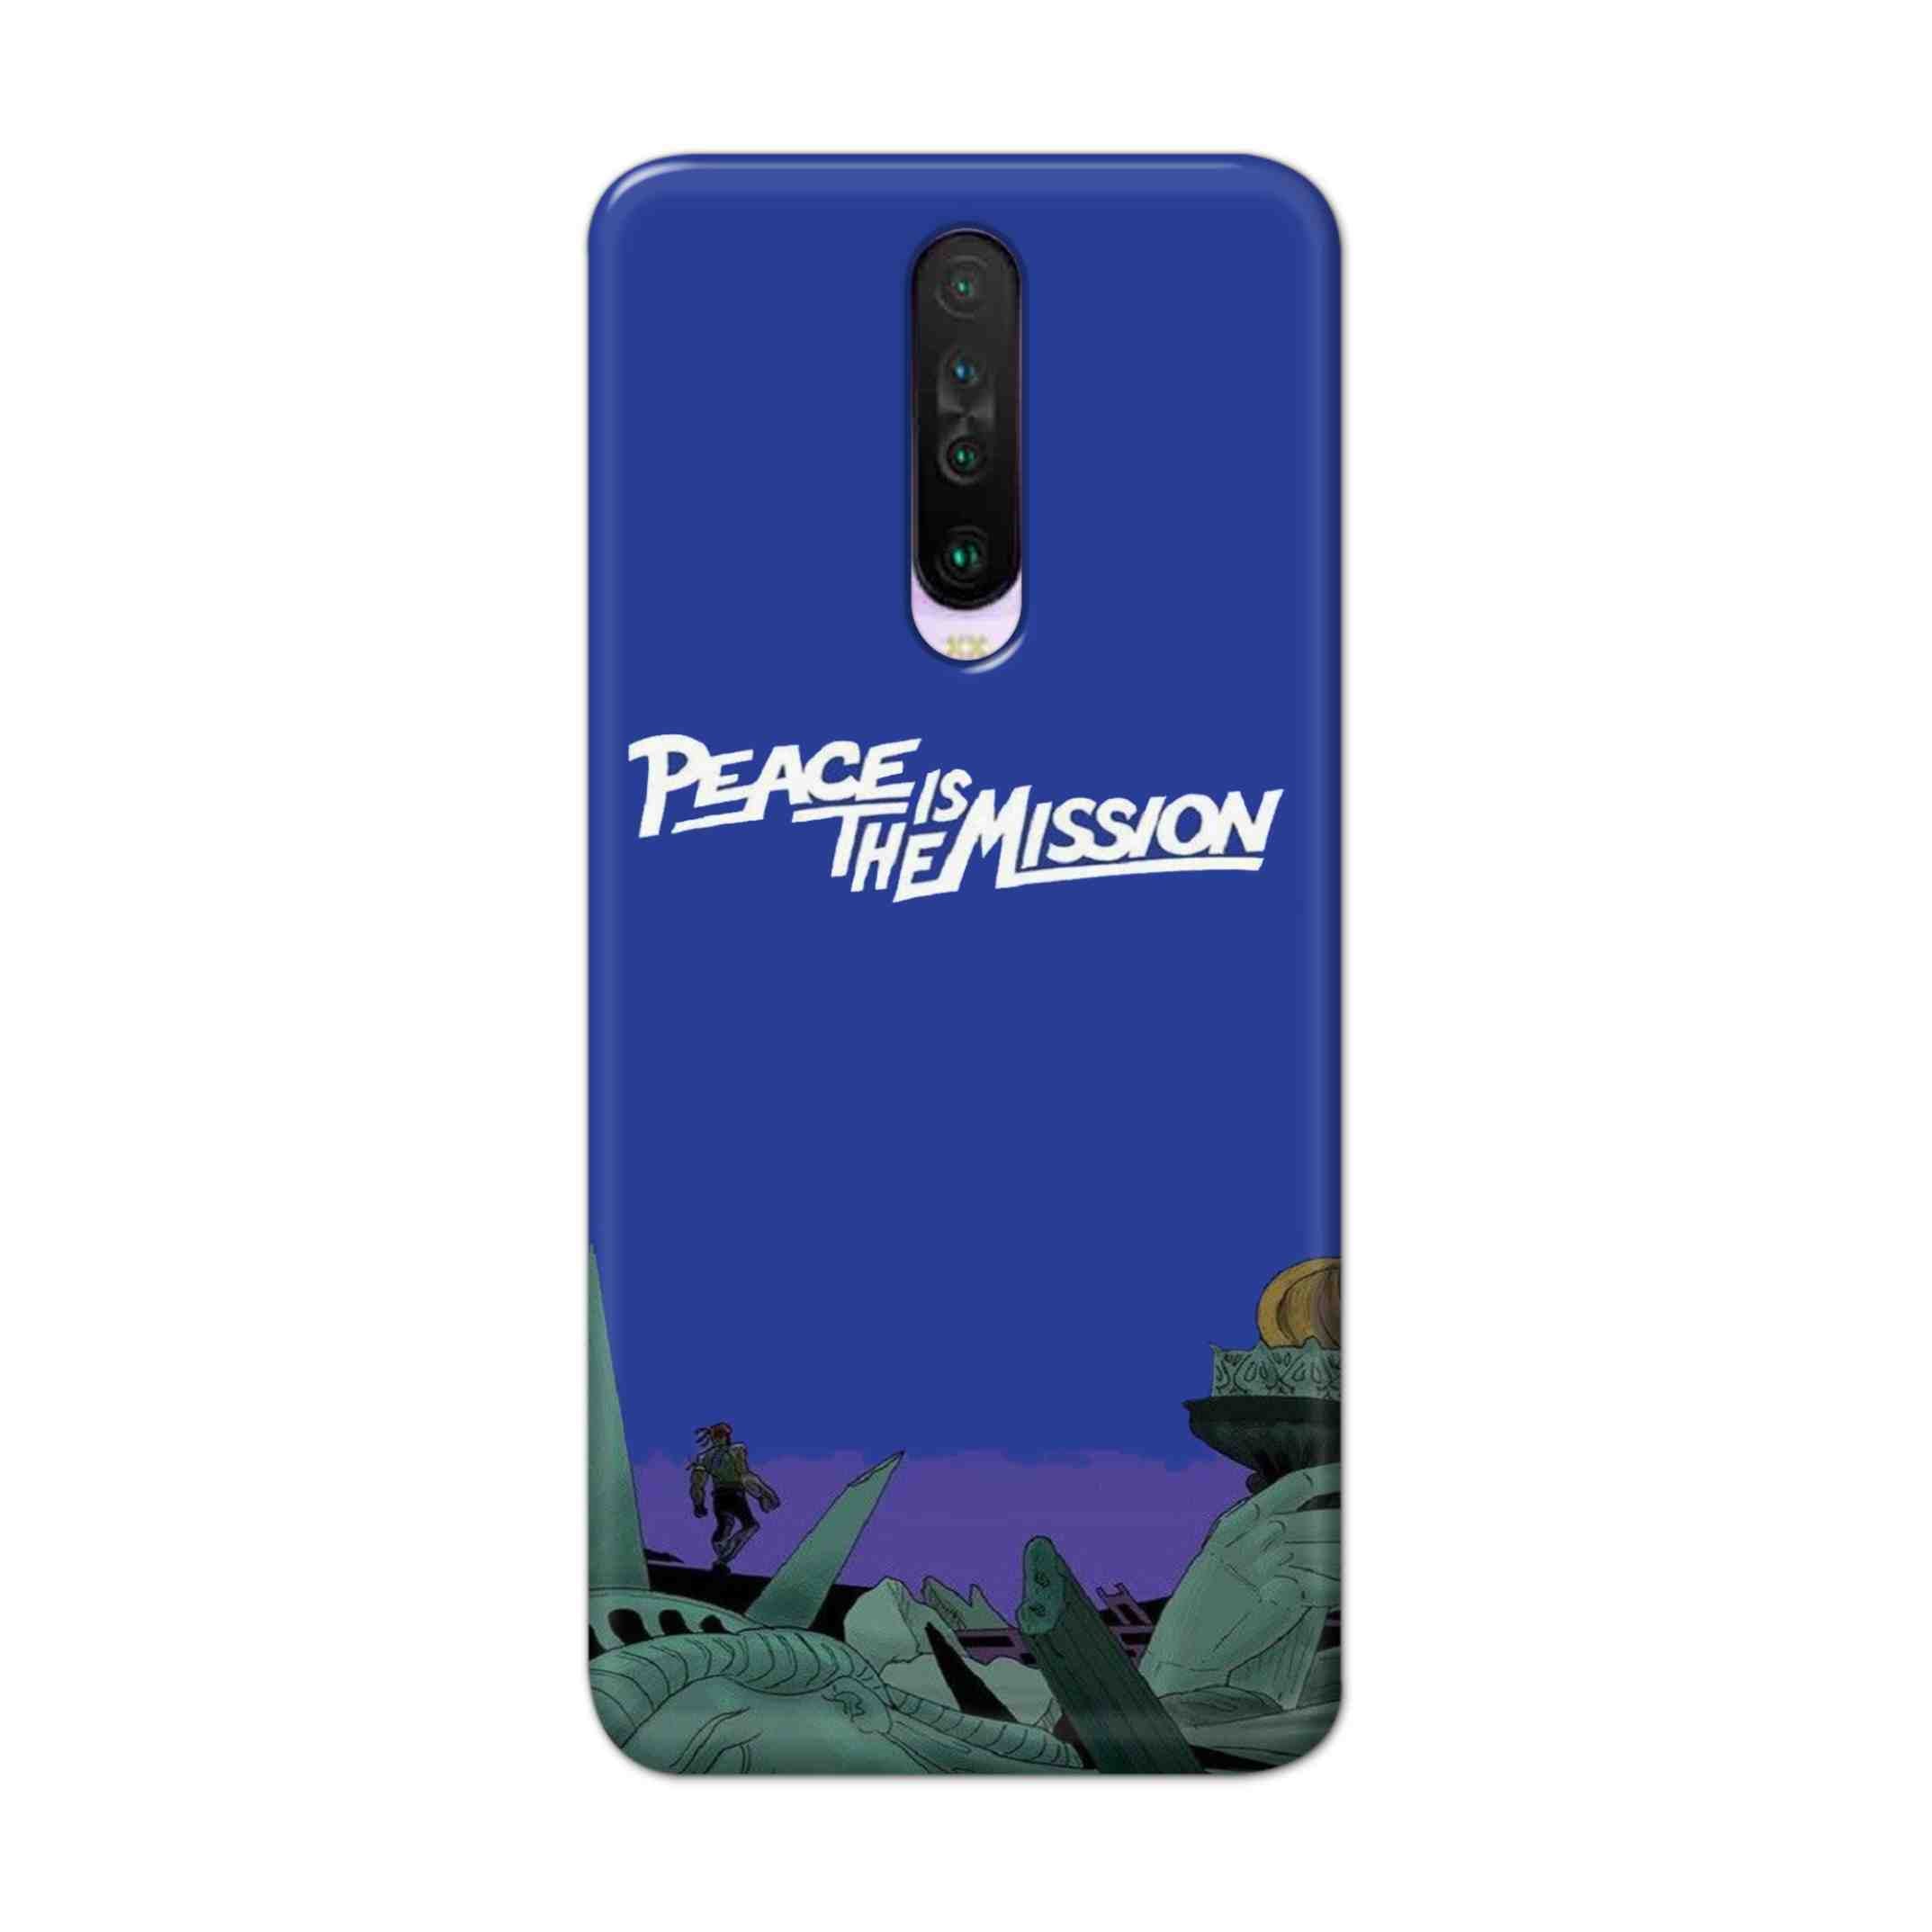 Buy Peace Is The Misson Hard Back Mobile Phone Case Cover For Poco X2 Online